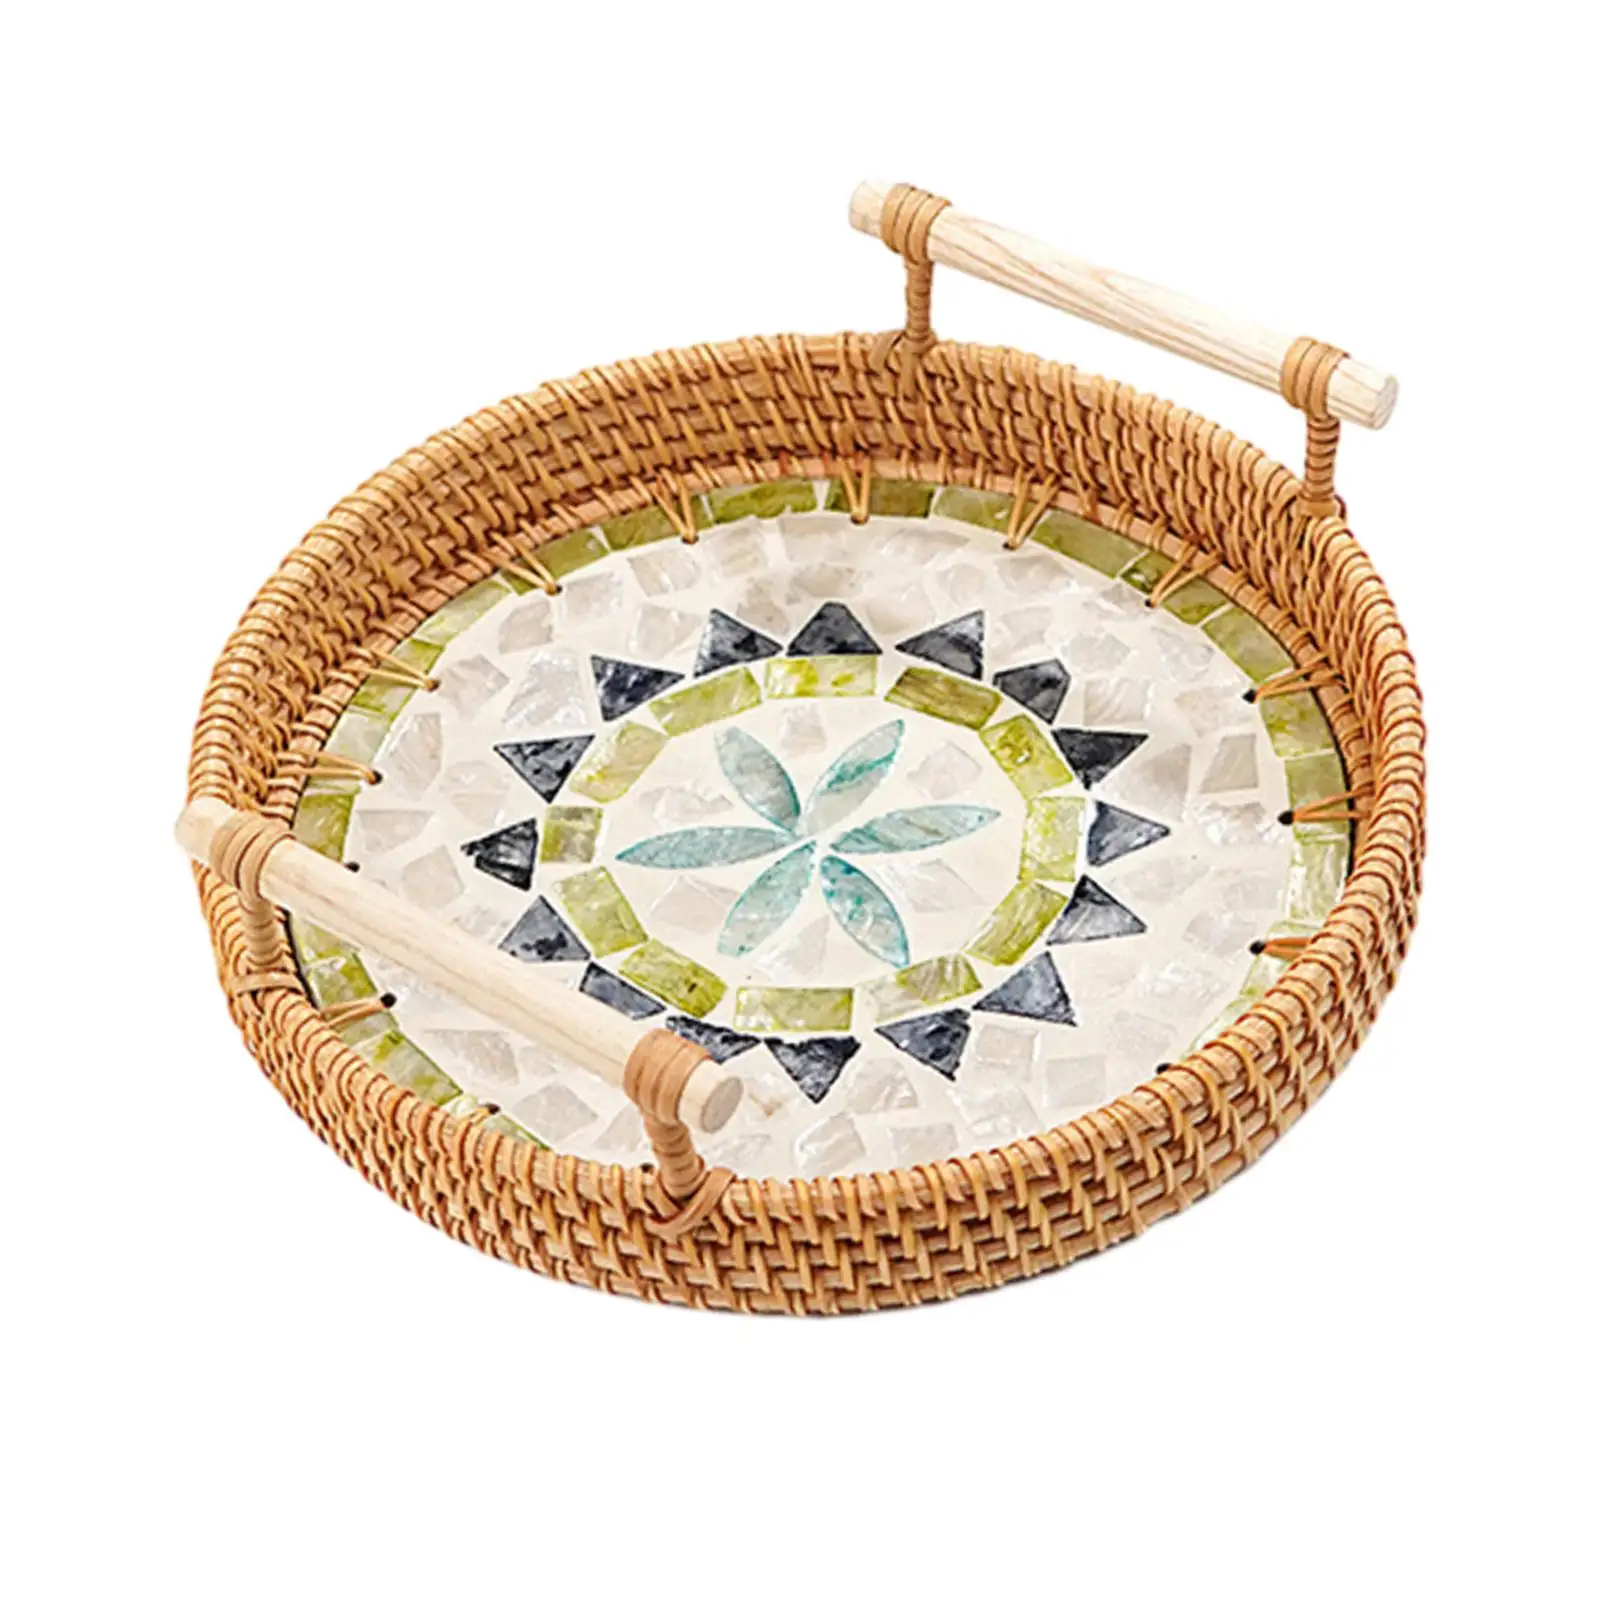 Woven Rattan Serving Tray with Handles Breakfast Cake Snacks Tray for Coffee Table Afternoon Tea Living Room Parties Countertop